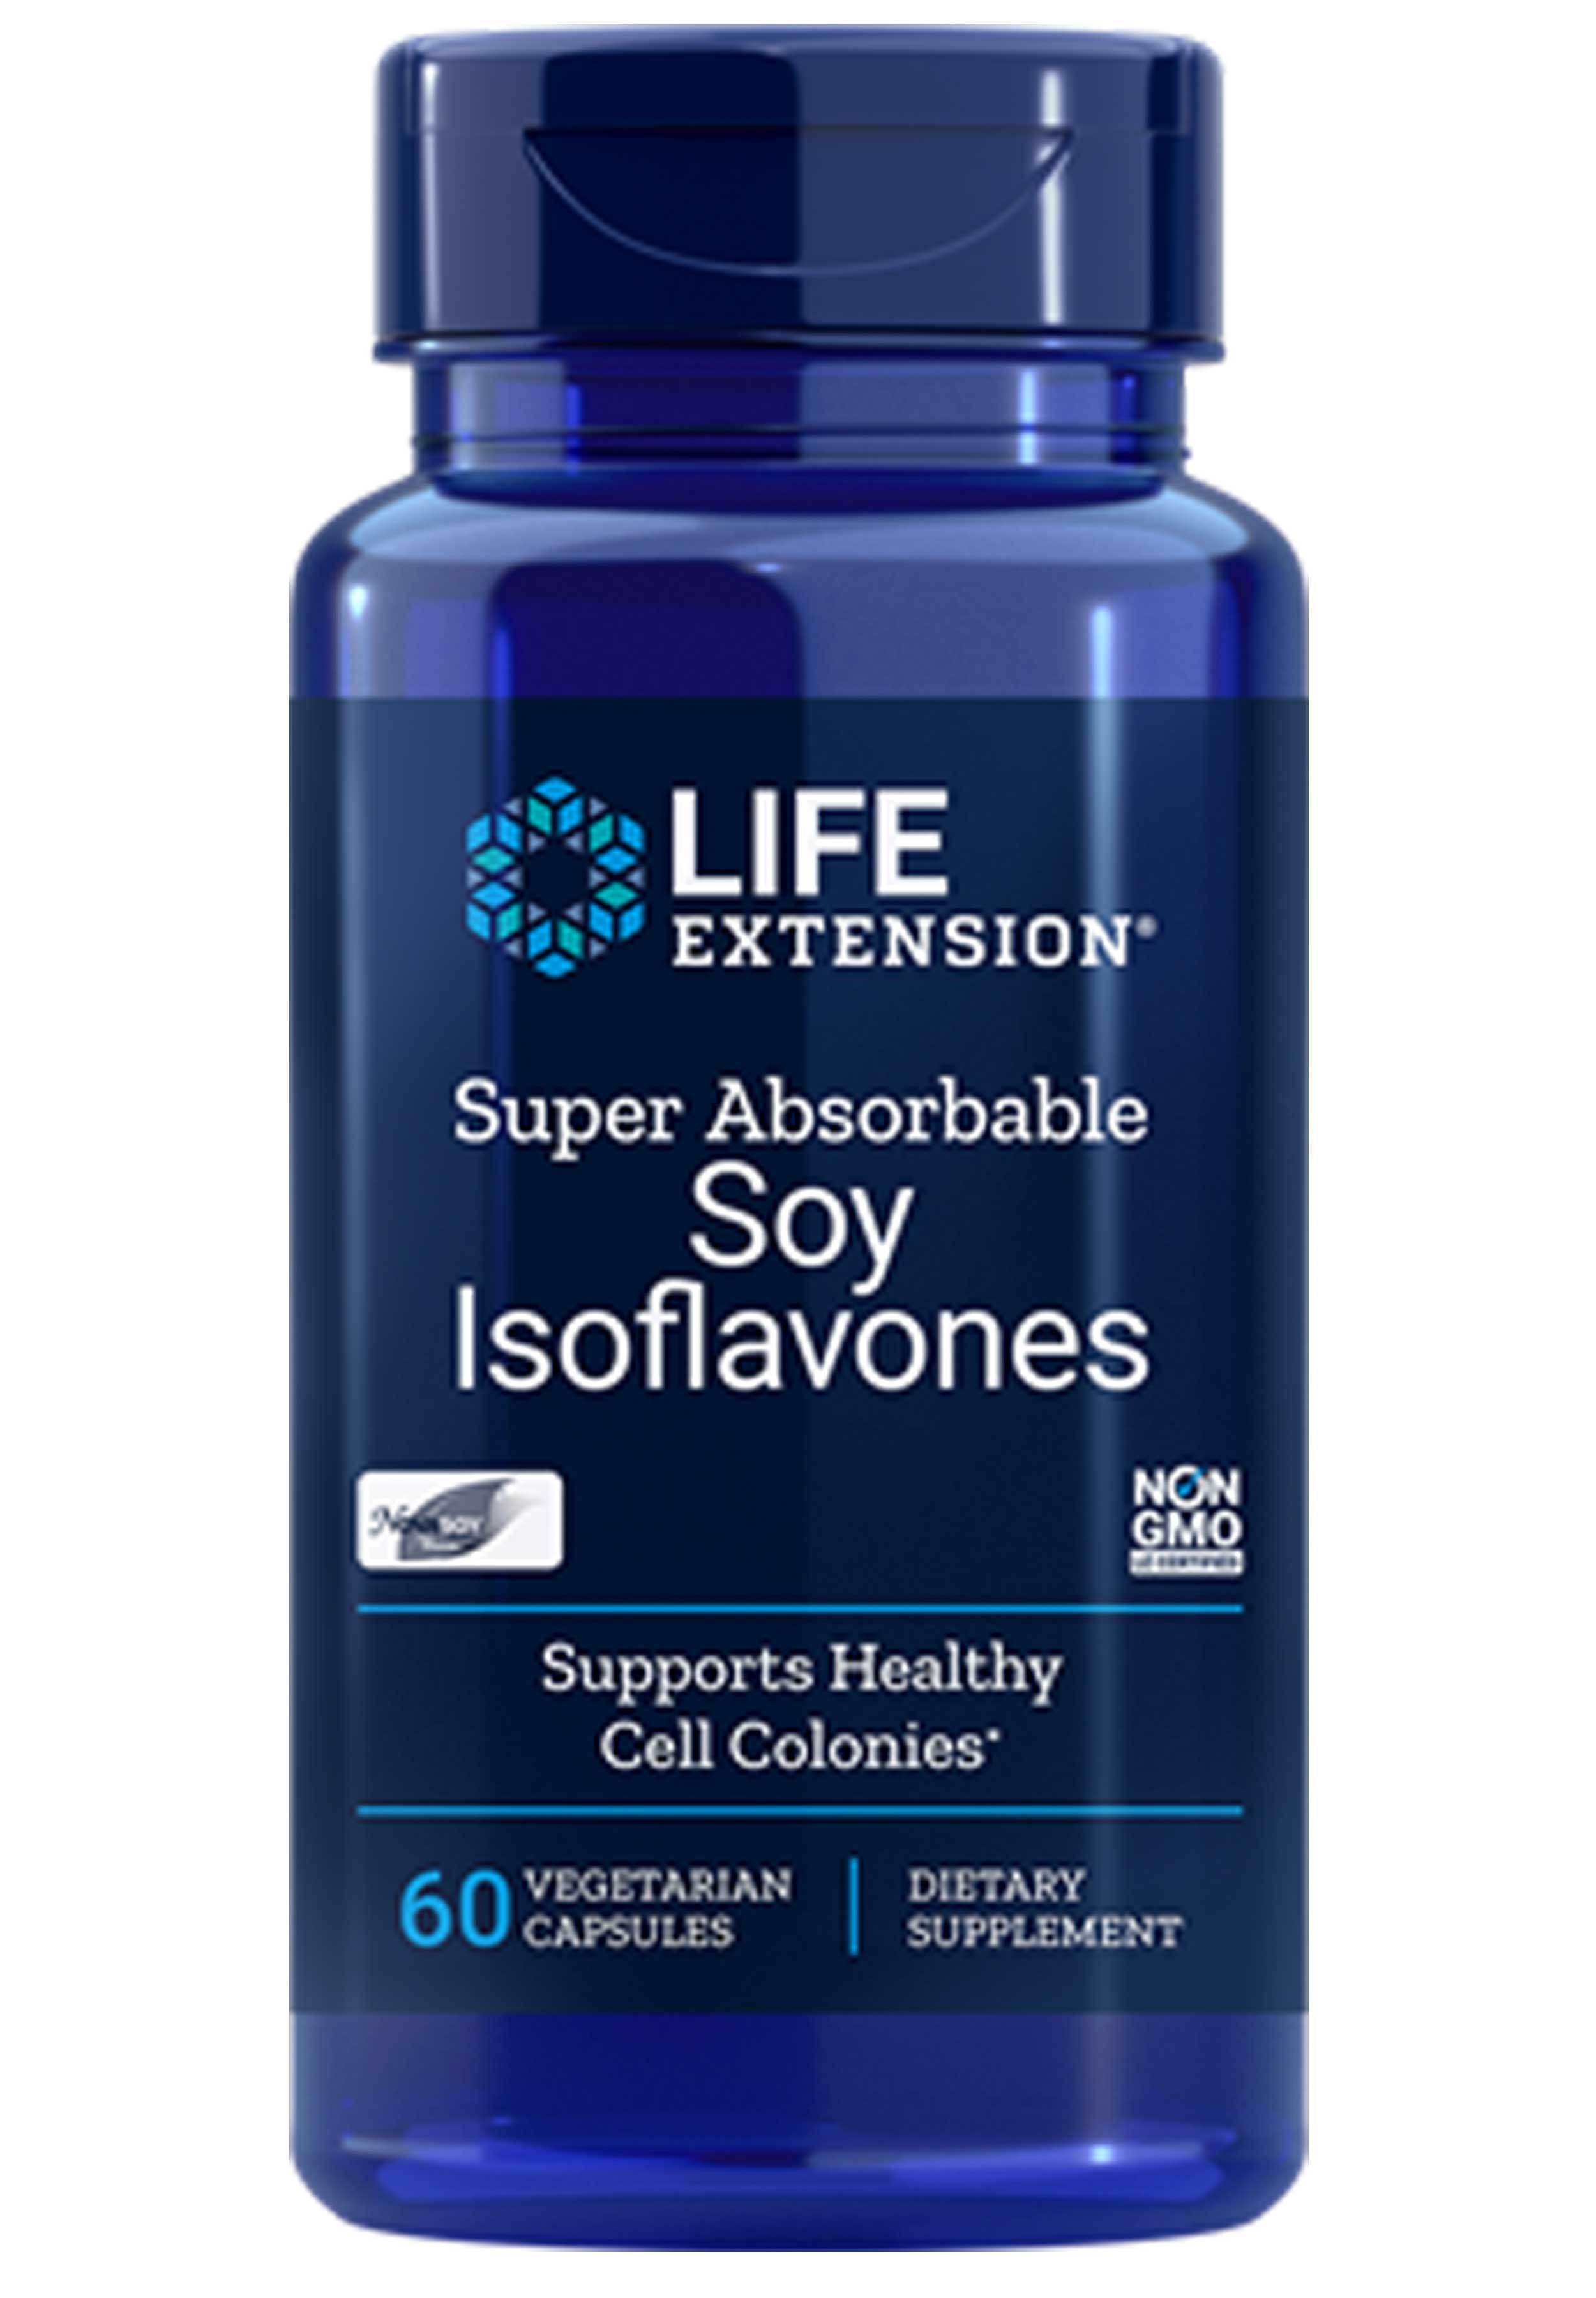 Life Extension Super Absorbable Soy Isoflavones